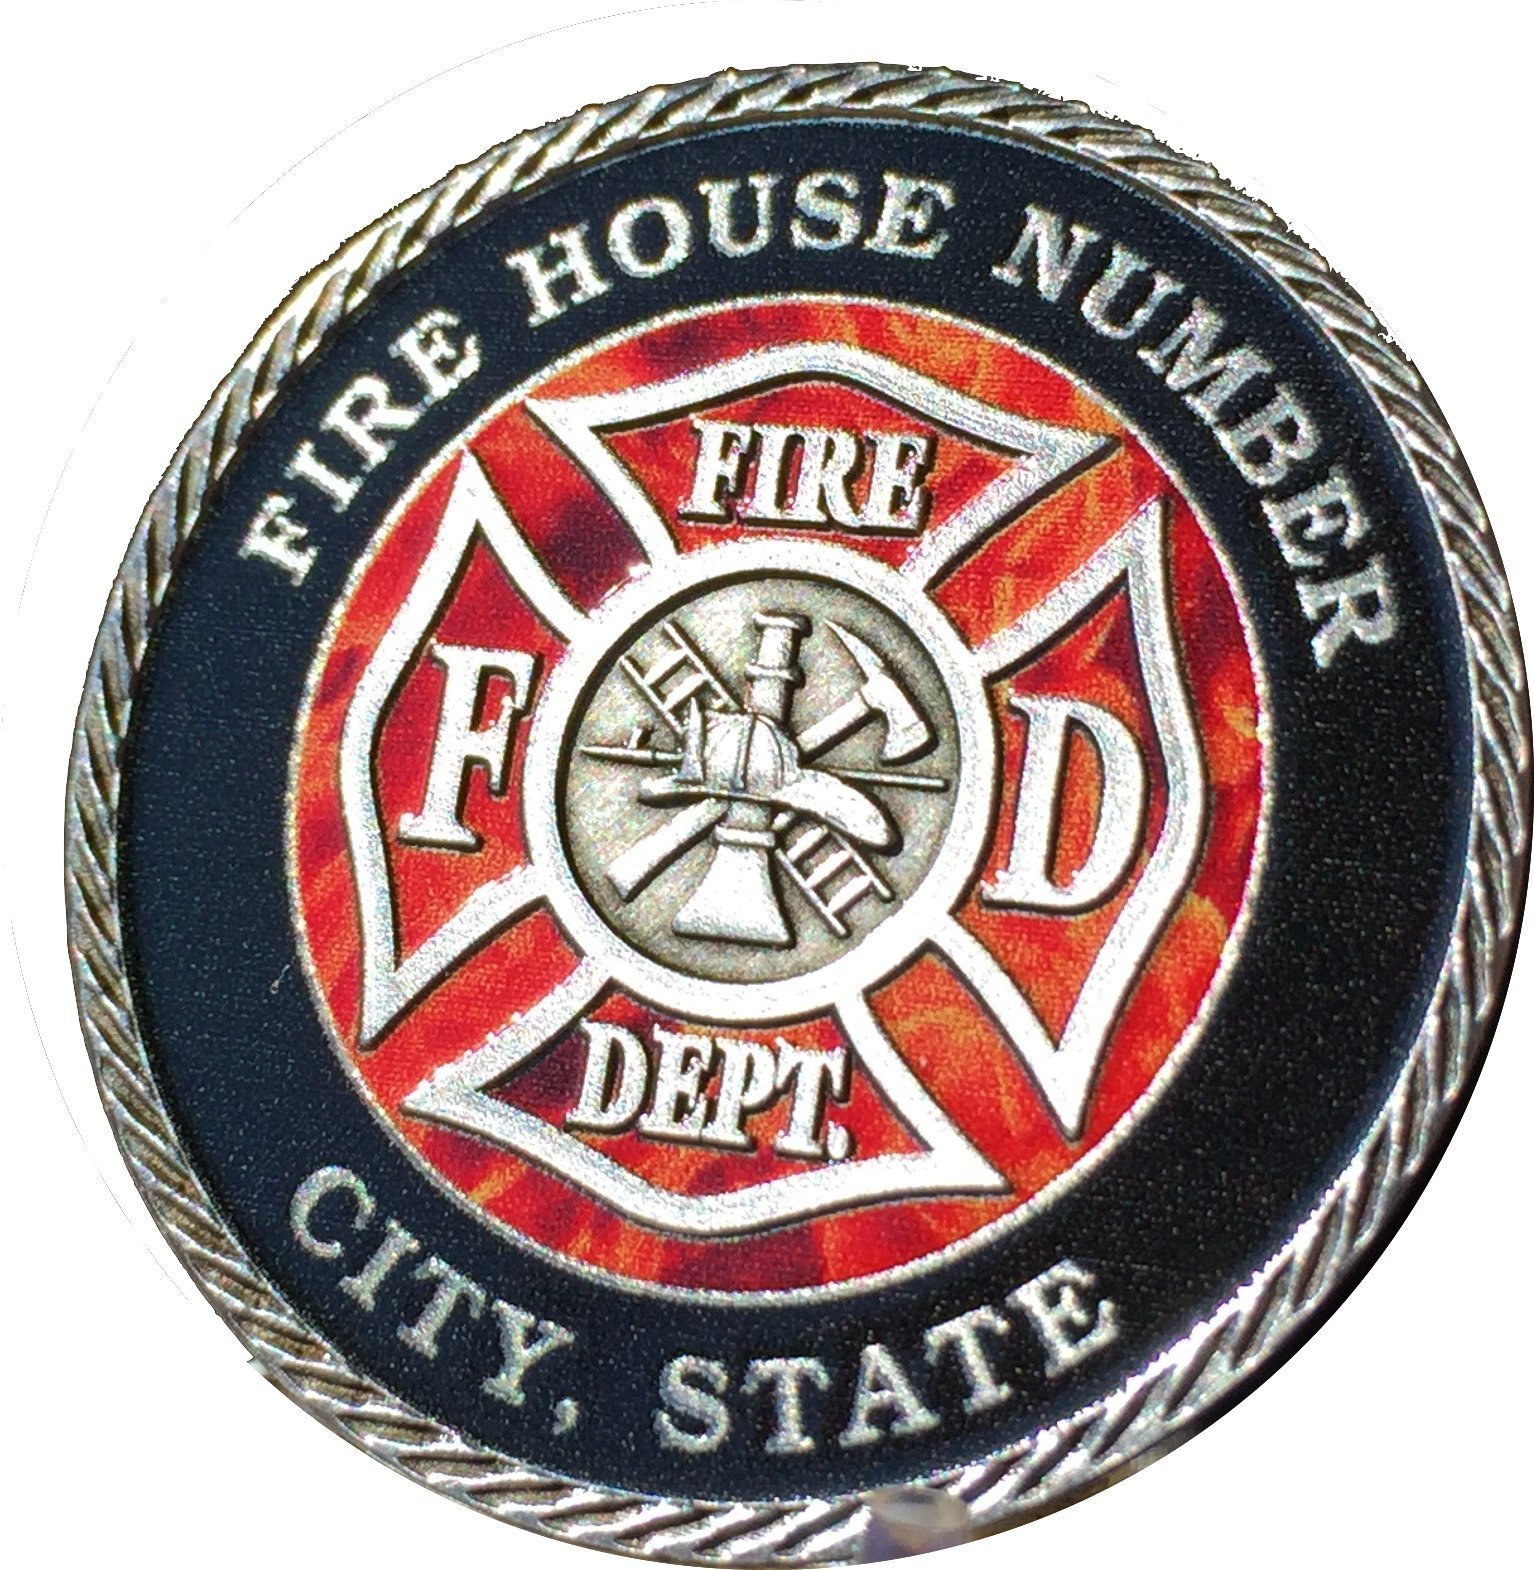 Set of 10 Customized Fire House & City Pewter Color Fireman Challenge Coins 1...